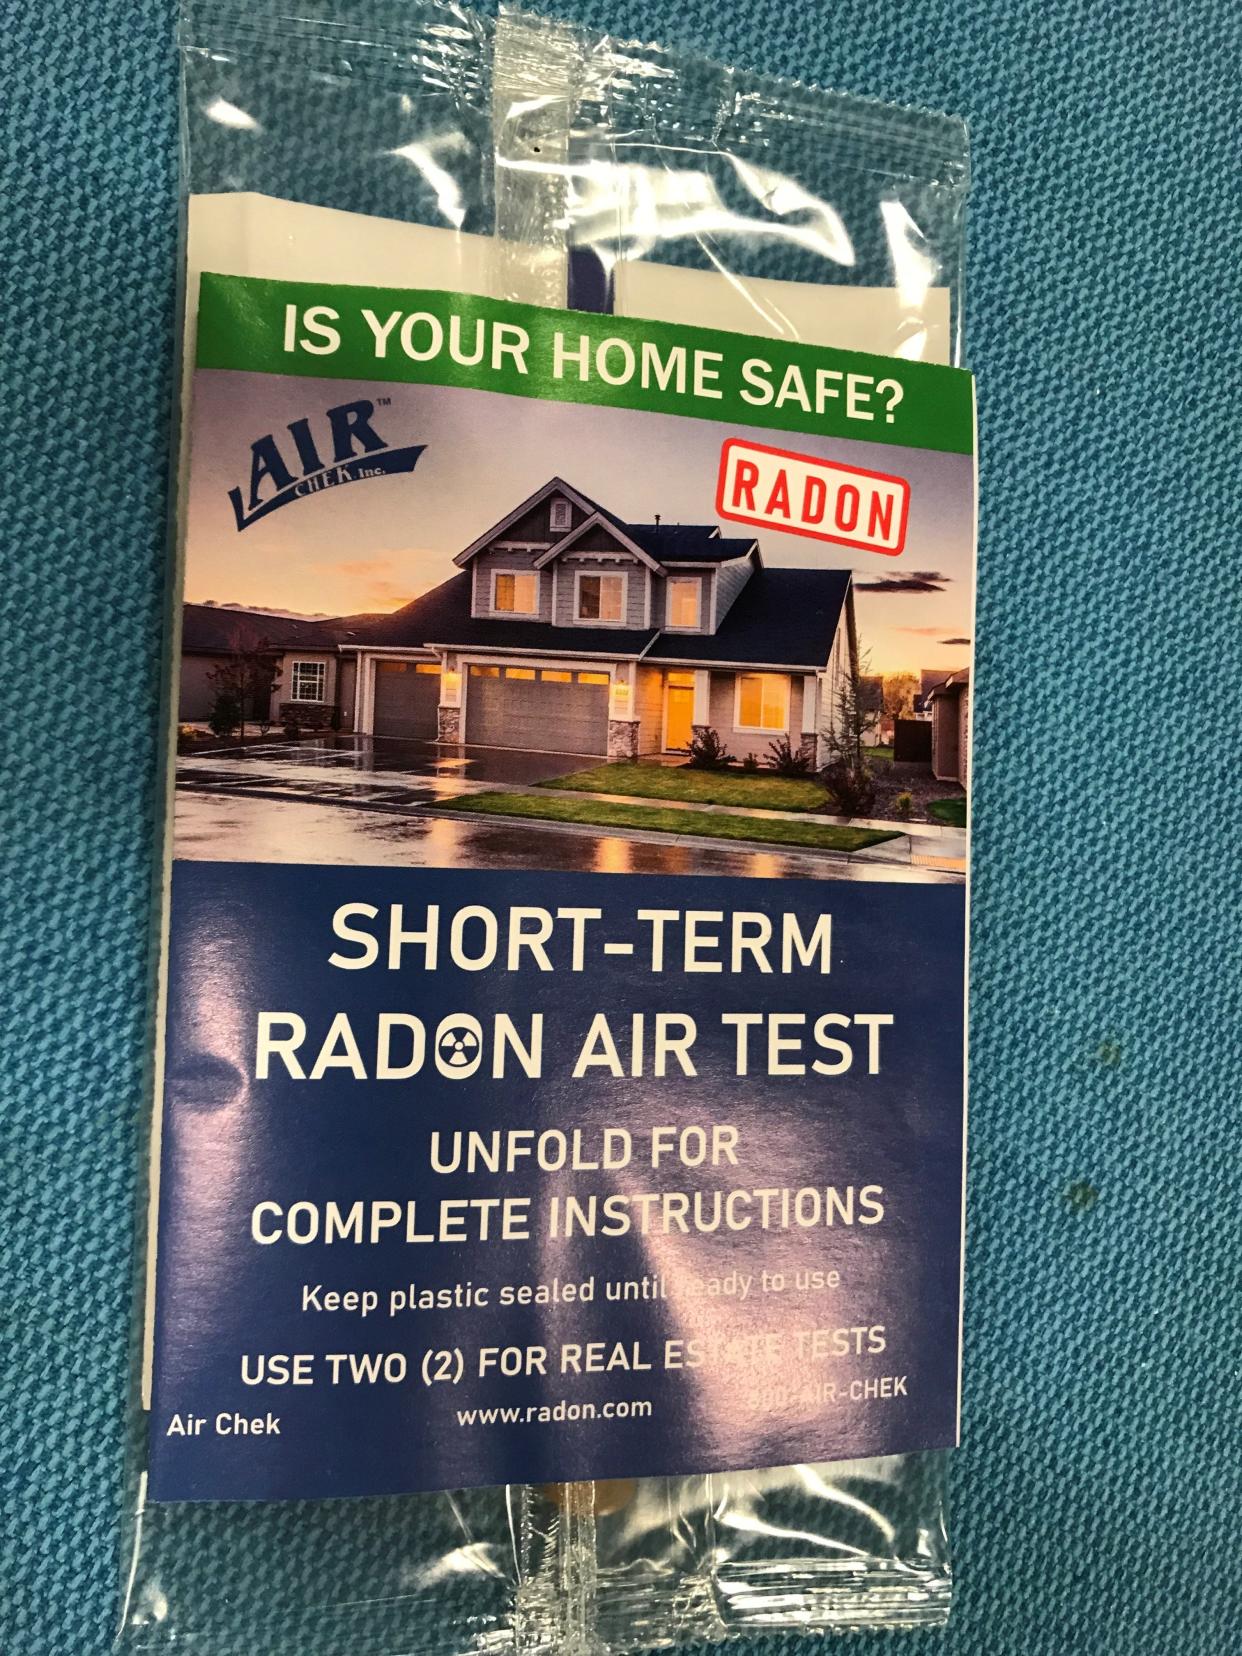 The simple radon test kits offered by Michigan's county health programs, either free or at below cost, are also available online for $17.99 via www.radon.com. To use, hang the envelope of activated charcoal from a basement ceiling for three to seven days.